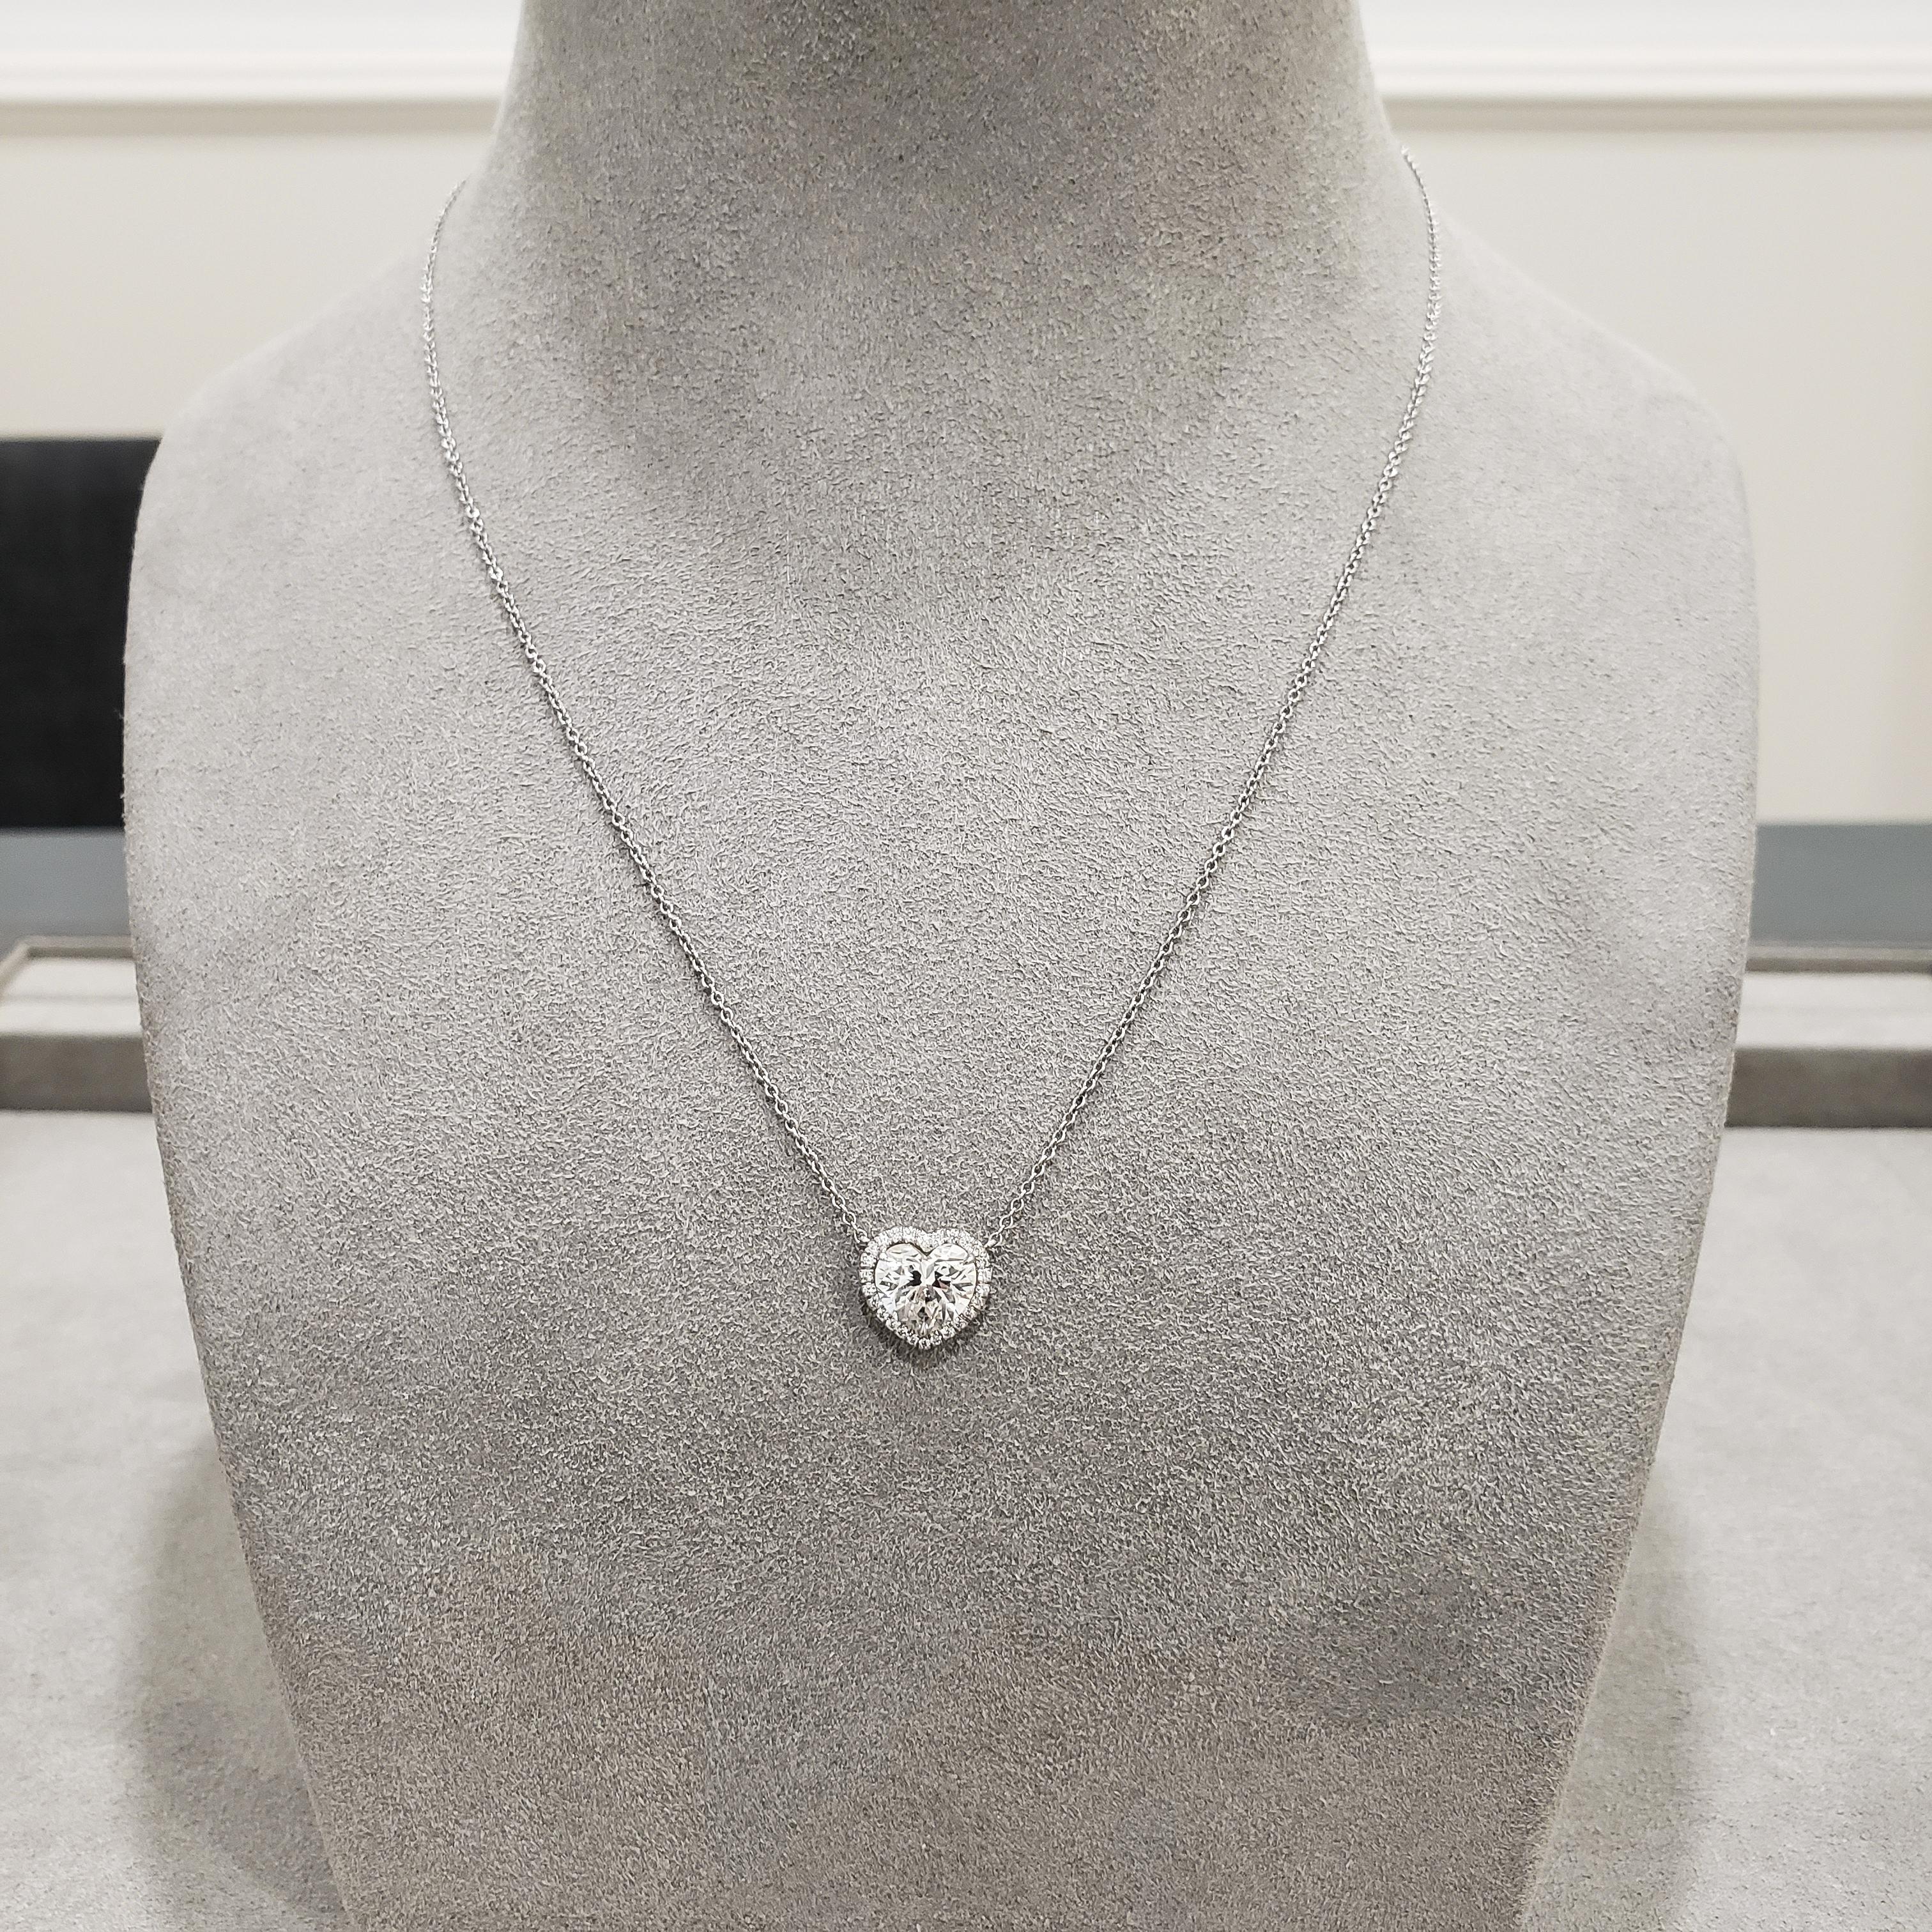 Showcasing a 1.81 carat heart shape diamond, certified by GIA as K color, SI2 clarity, surrounded by a halo of round brilliant diamonds weighing 0.20 carats total. Attached to a 16 inch chain. Made in platinum.

Style available in different price